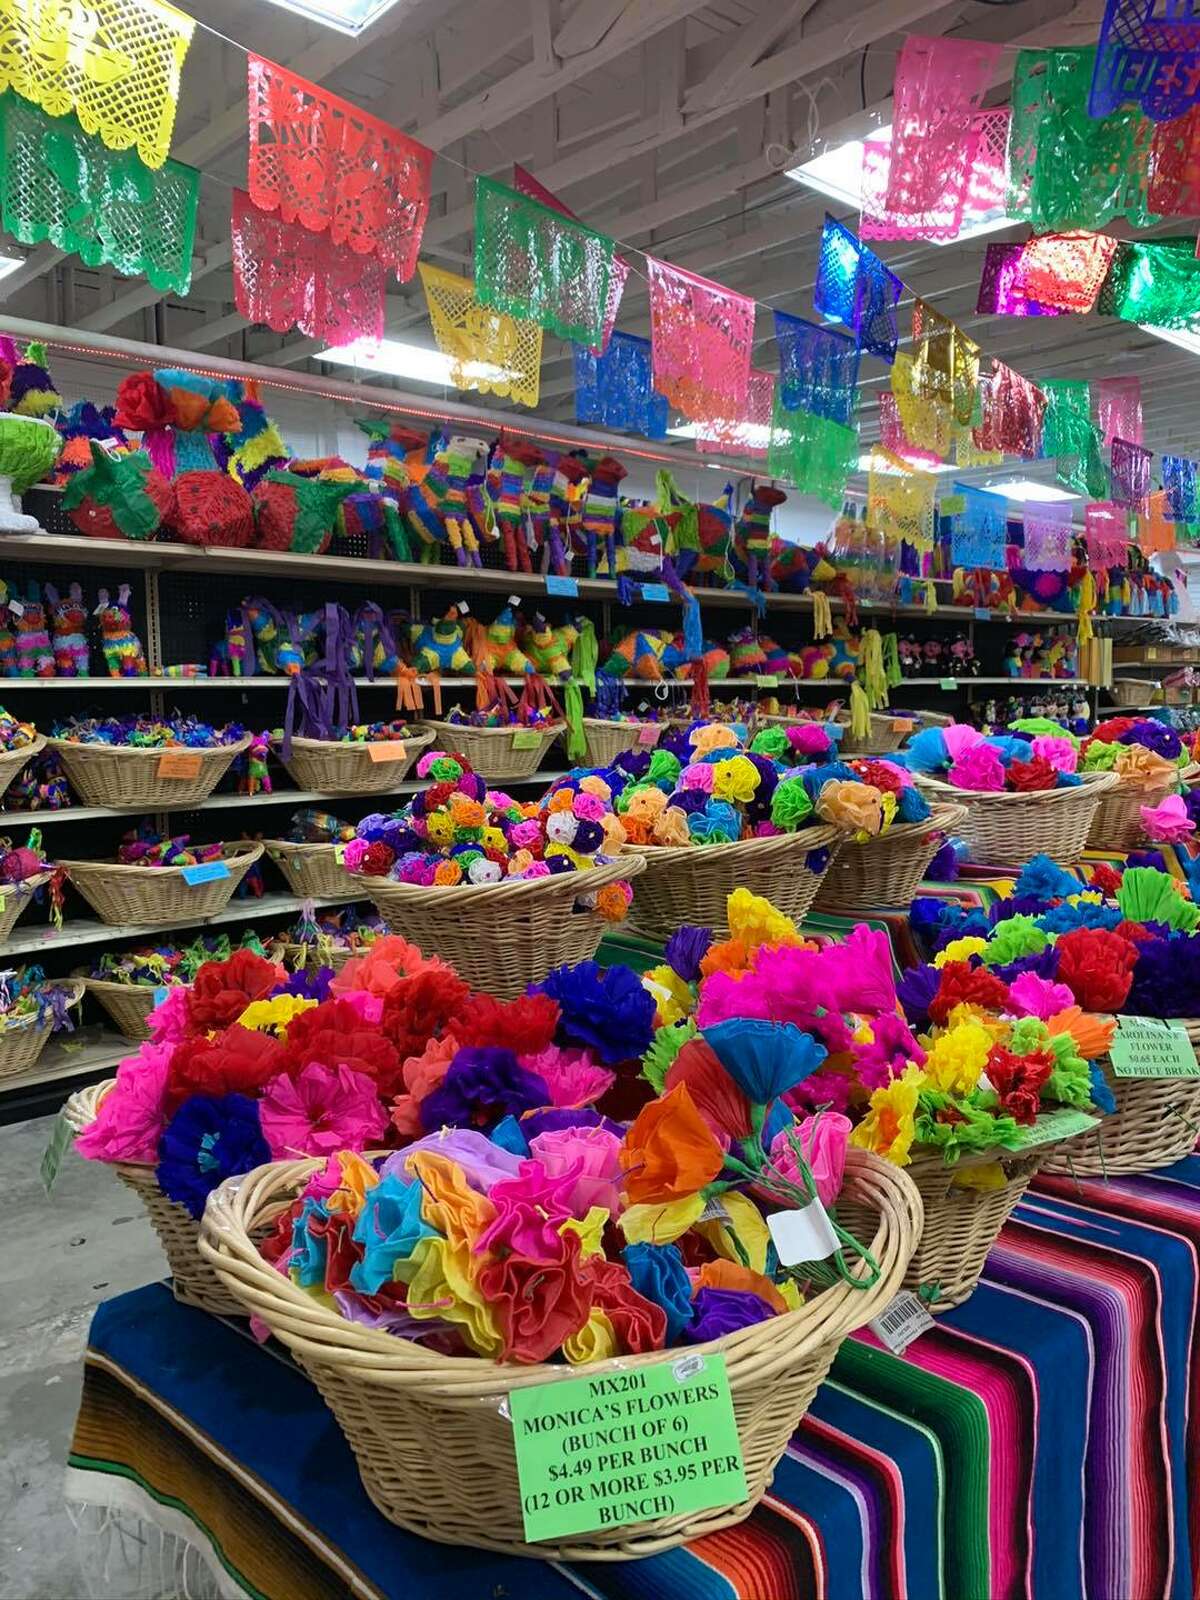 Call it San Antonio's version of retail therapy or just Fiesta fever, shoppers at Amols', the longstanding party supply authority, are back. 